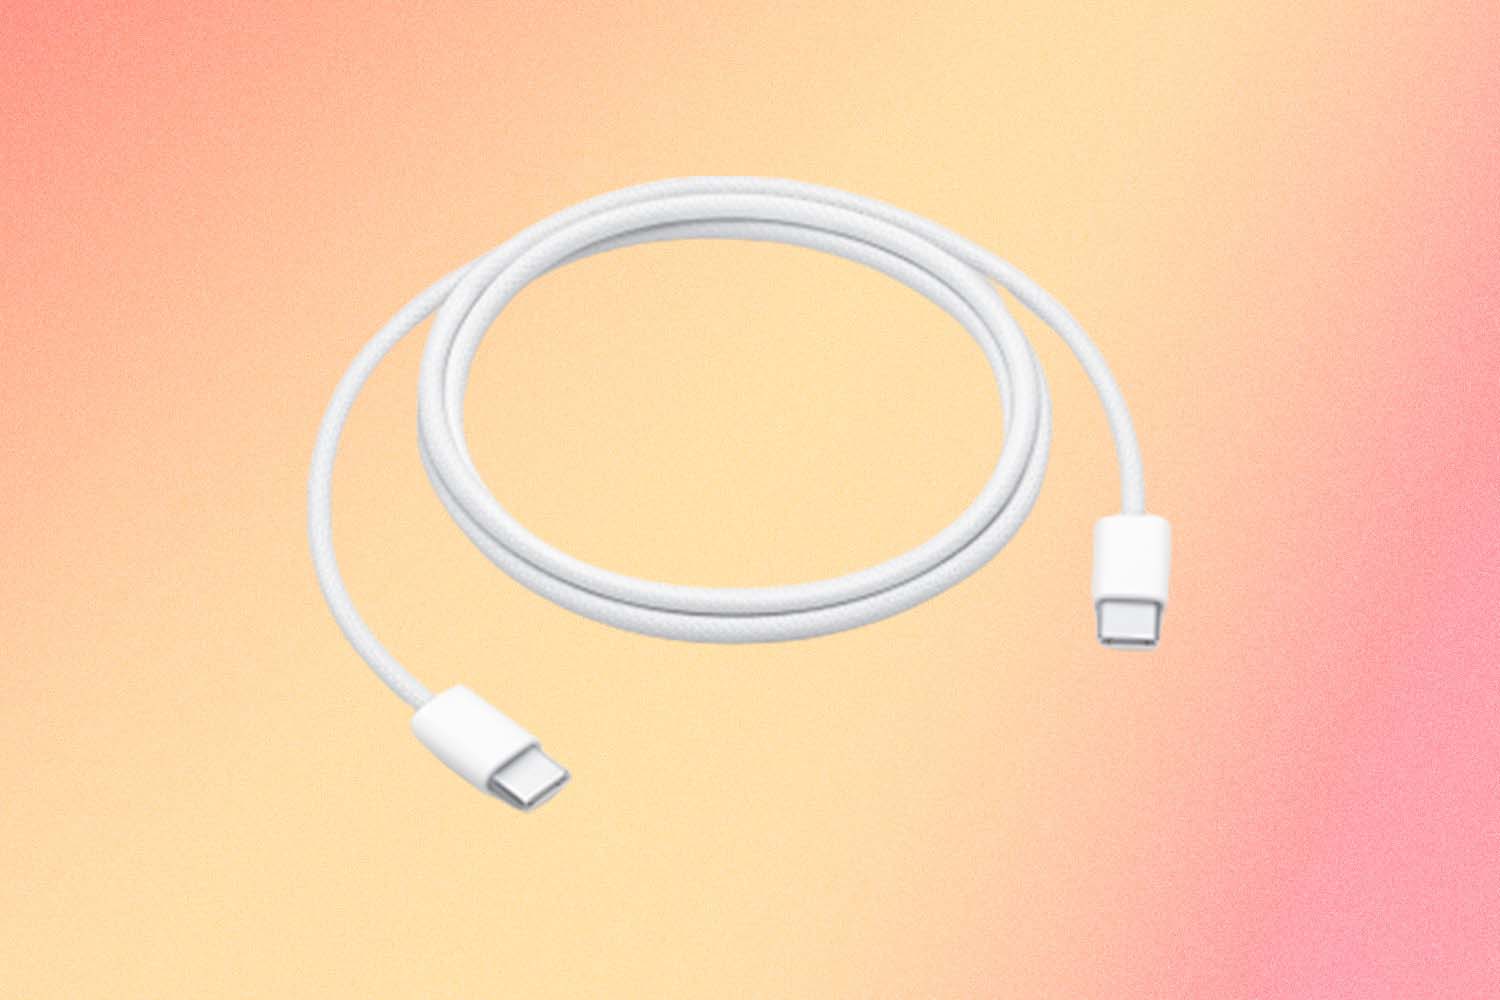 Are Apple's New USB-C Cables Worth It? - InsideHook